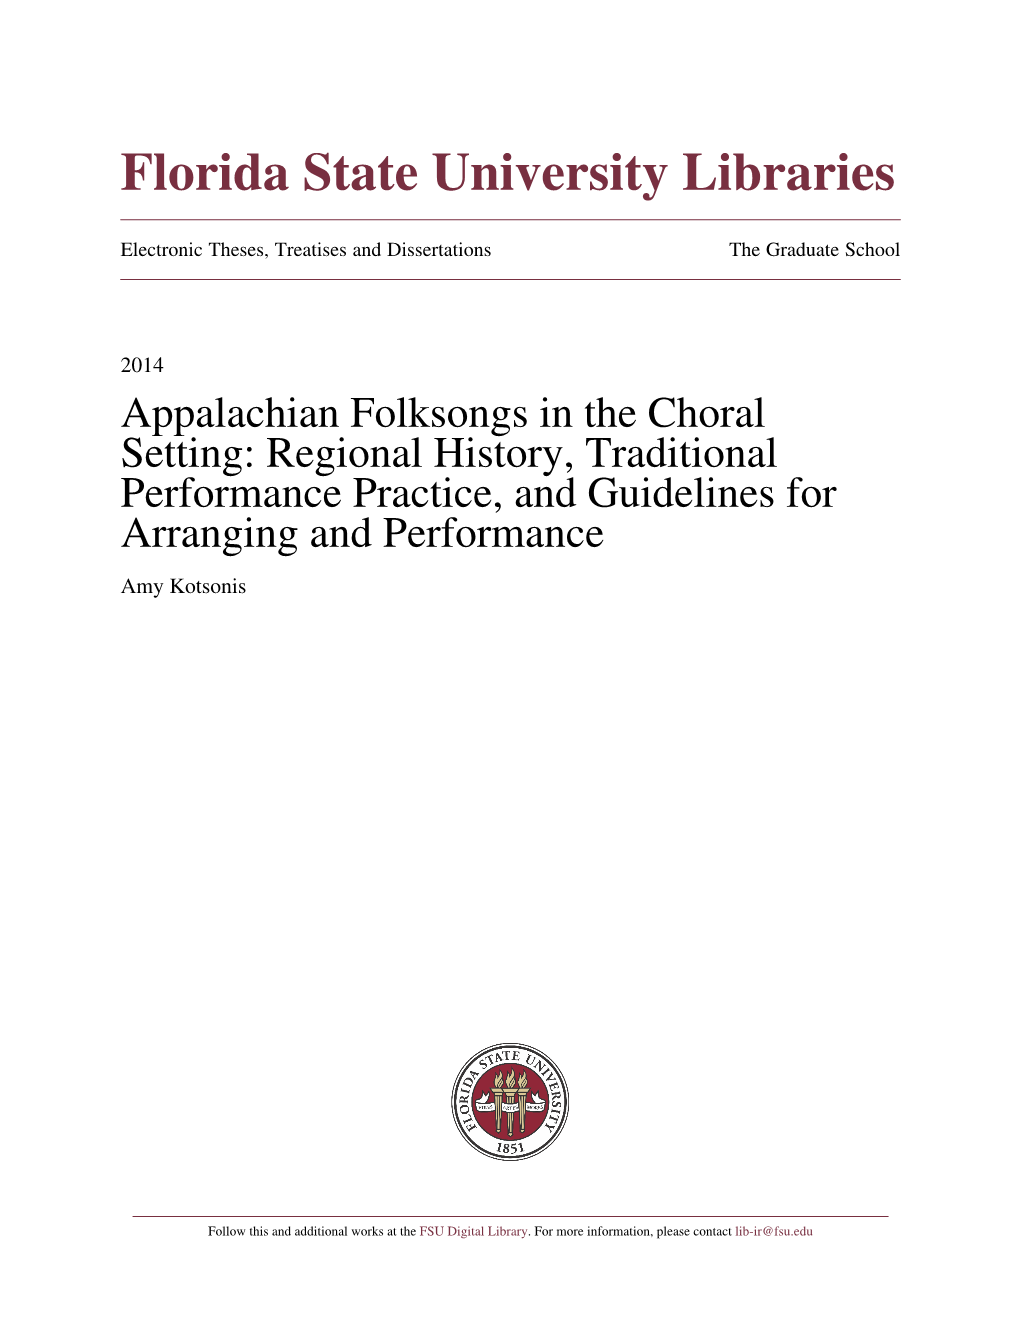 Appalachian Folksongs in the Choral Setting: Regional History, Traditional Performance Practice, and Guidelines for Arranging and Performance Amy Kotsonis